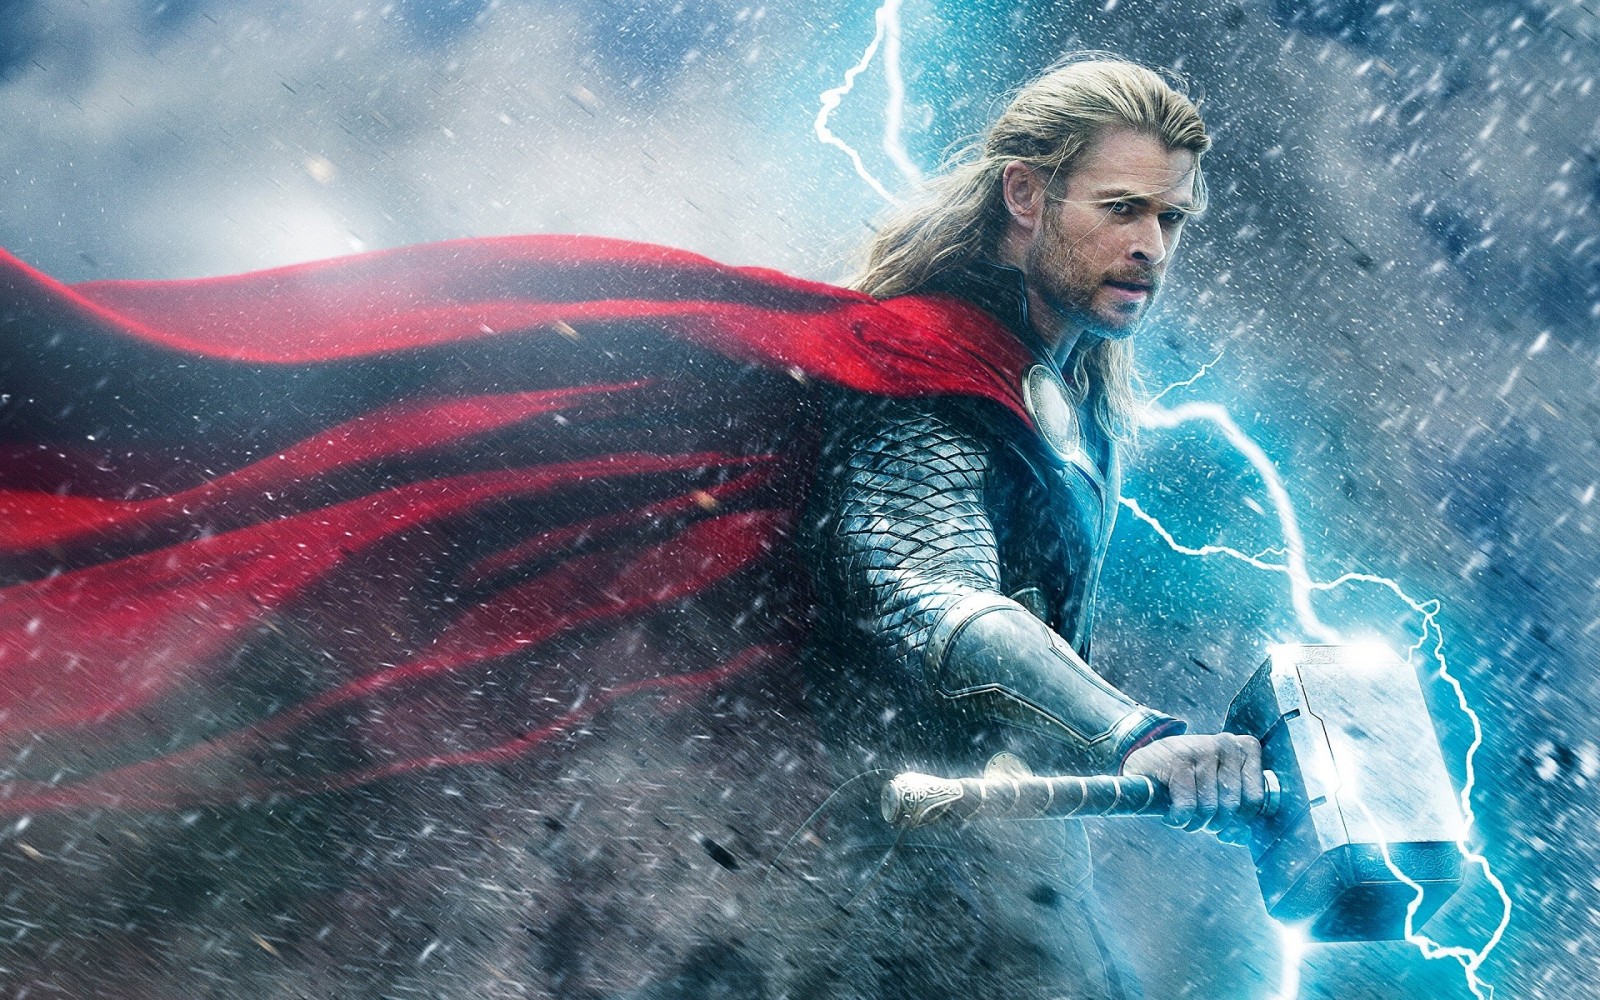 Which Marvel Character Are You? Thor's hammer